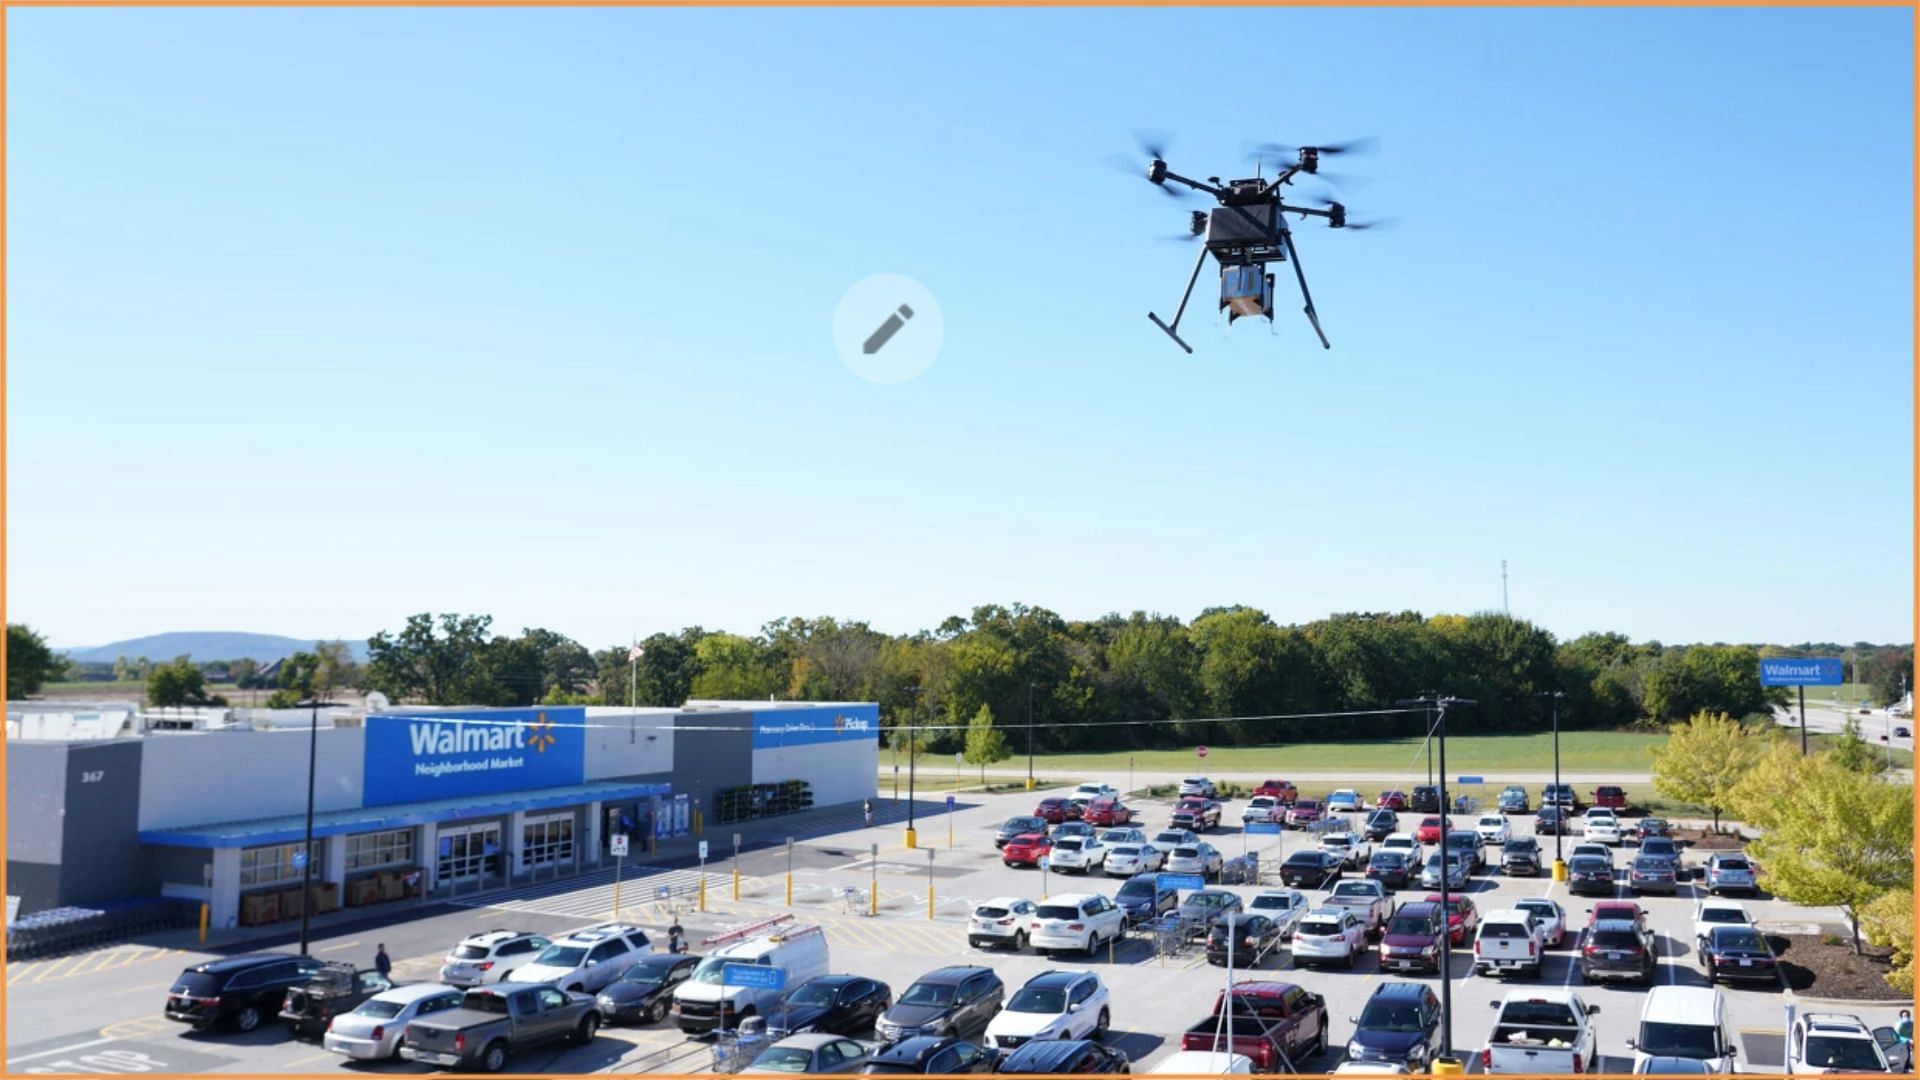 Walmart is pushing for same-day deliveries through drones in America (Image via Walmart)